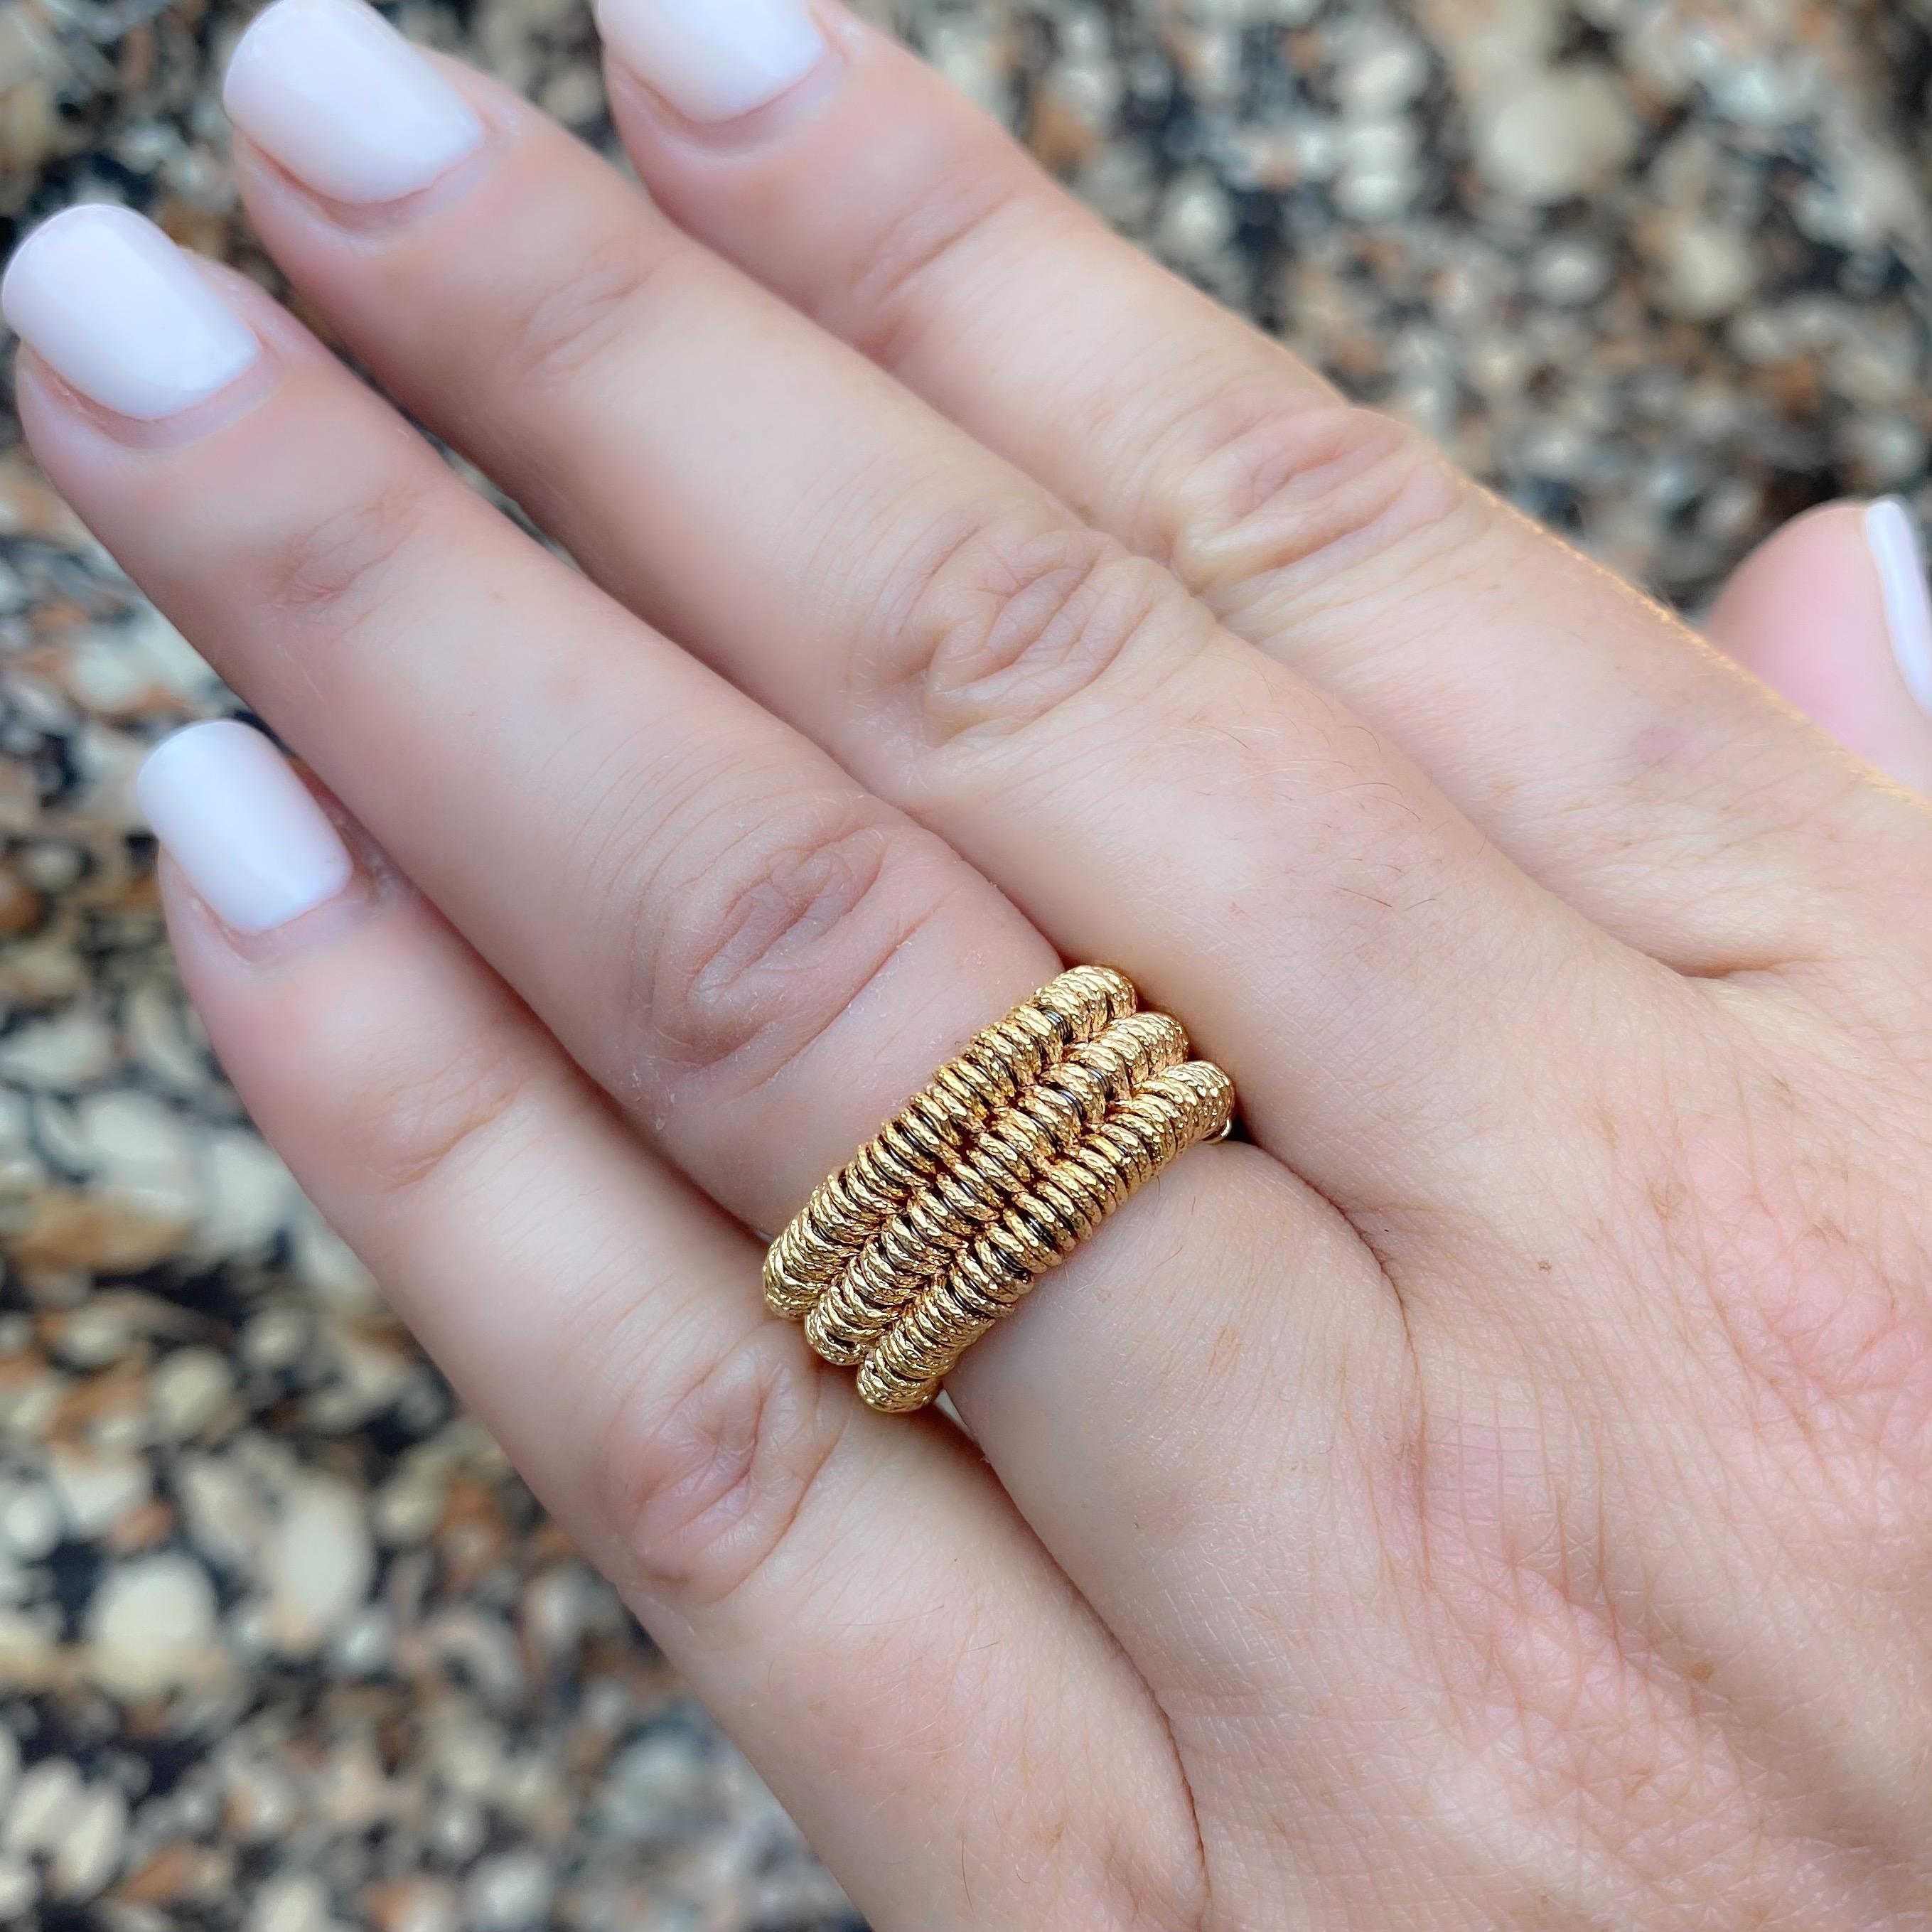 Made in Italy, from his JOY collection, this Demeglio 18k rose gold stretch ring is designed with three rows of textured links. It weighs 10.3 grams, and is size 5.5, with some stretch up. This ring has never been worn, and had an original retail of